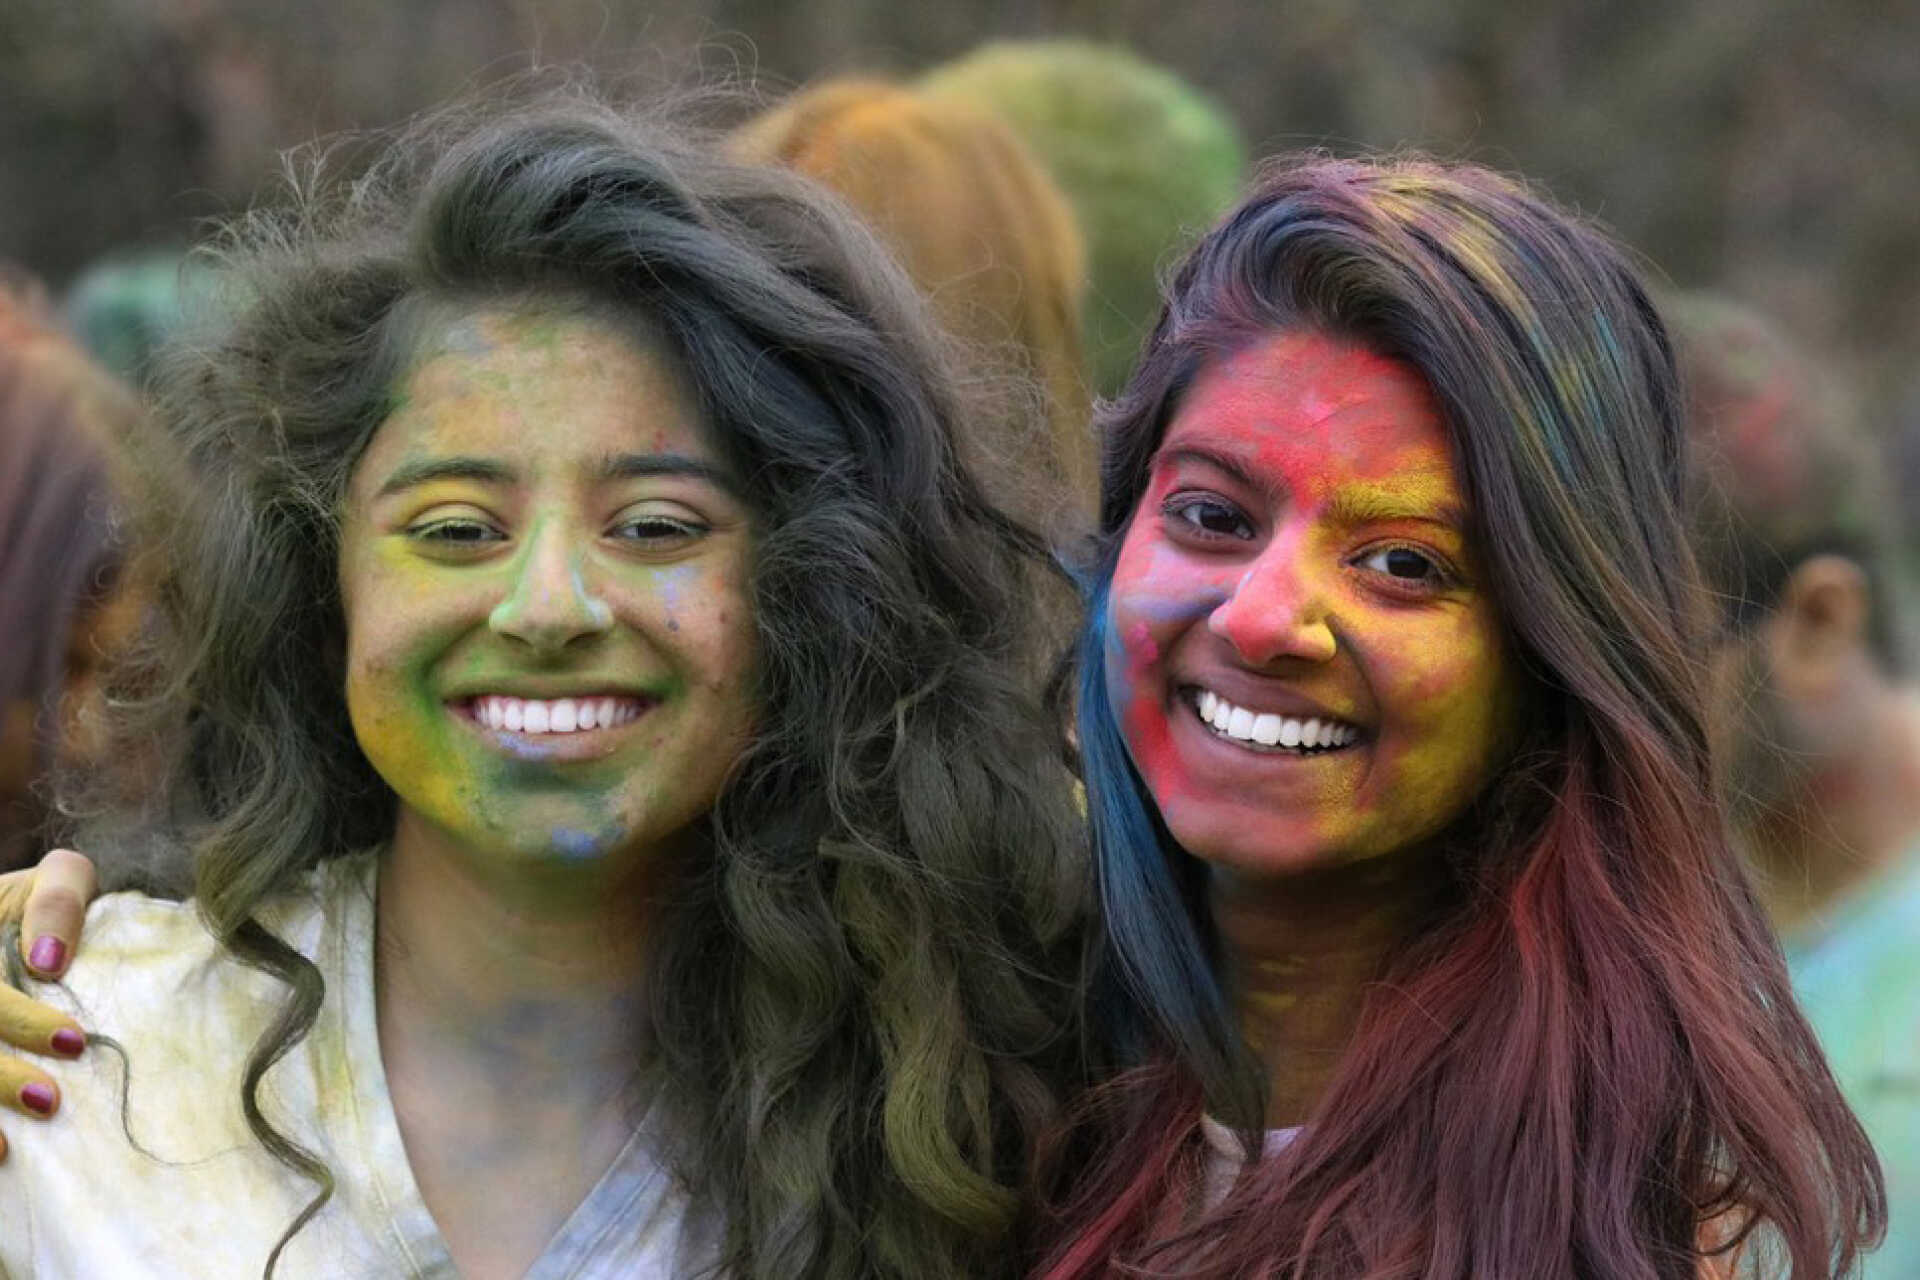 Two female students covered in paint celebrate the Holi Festival